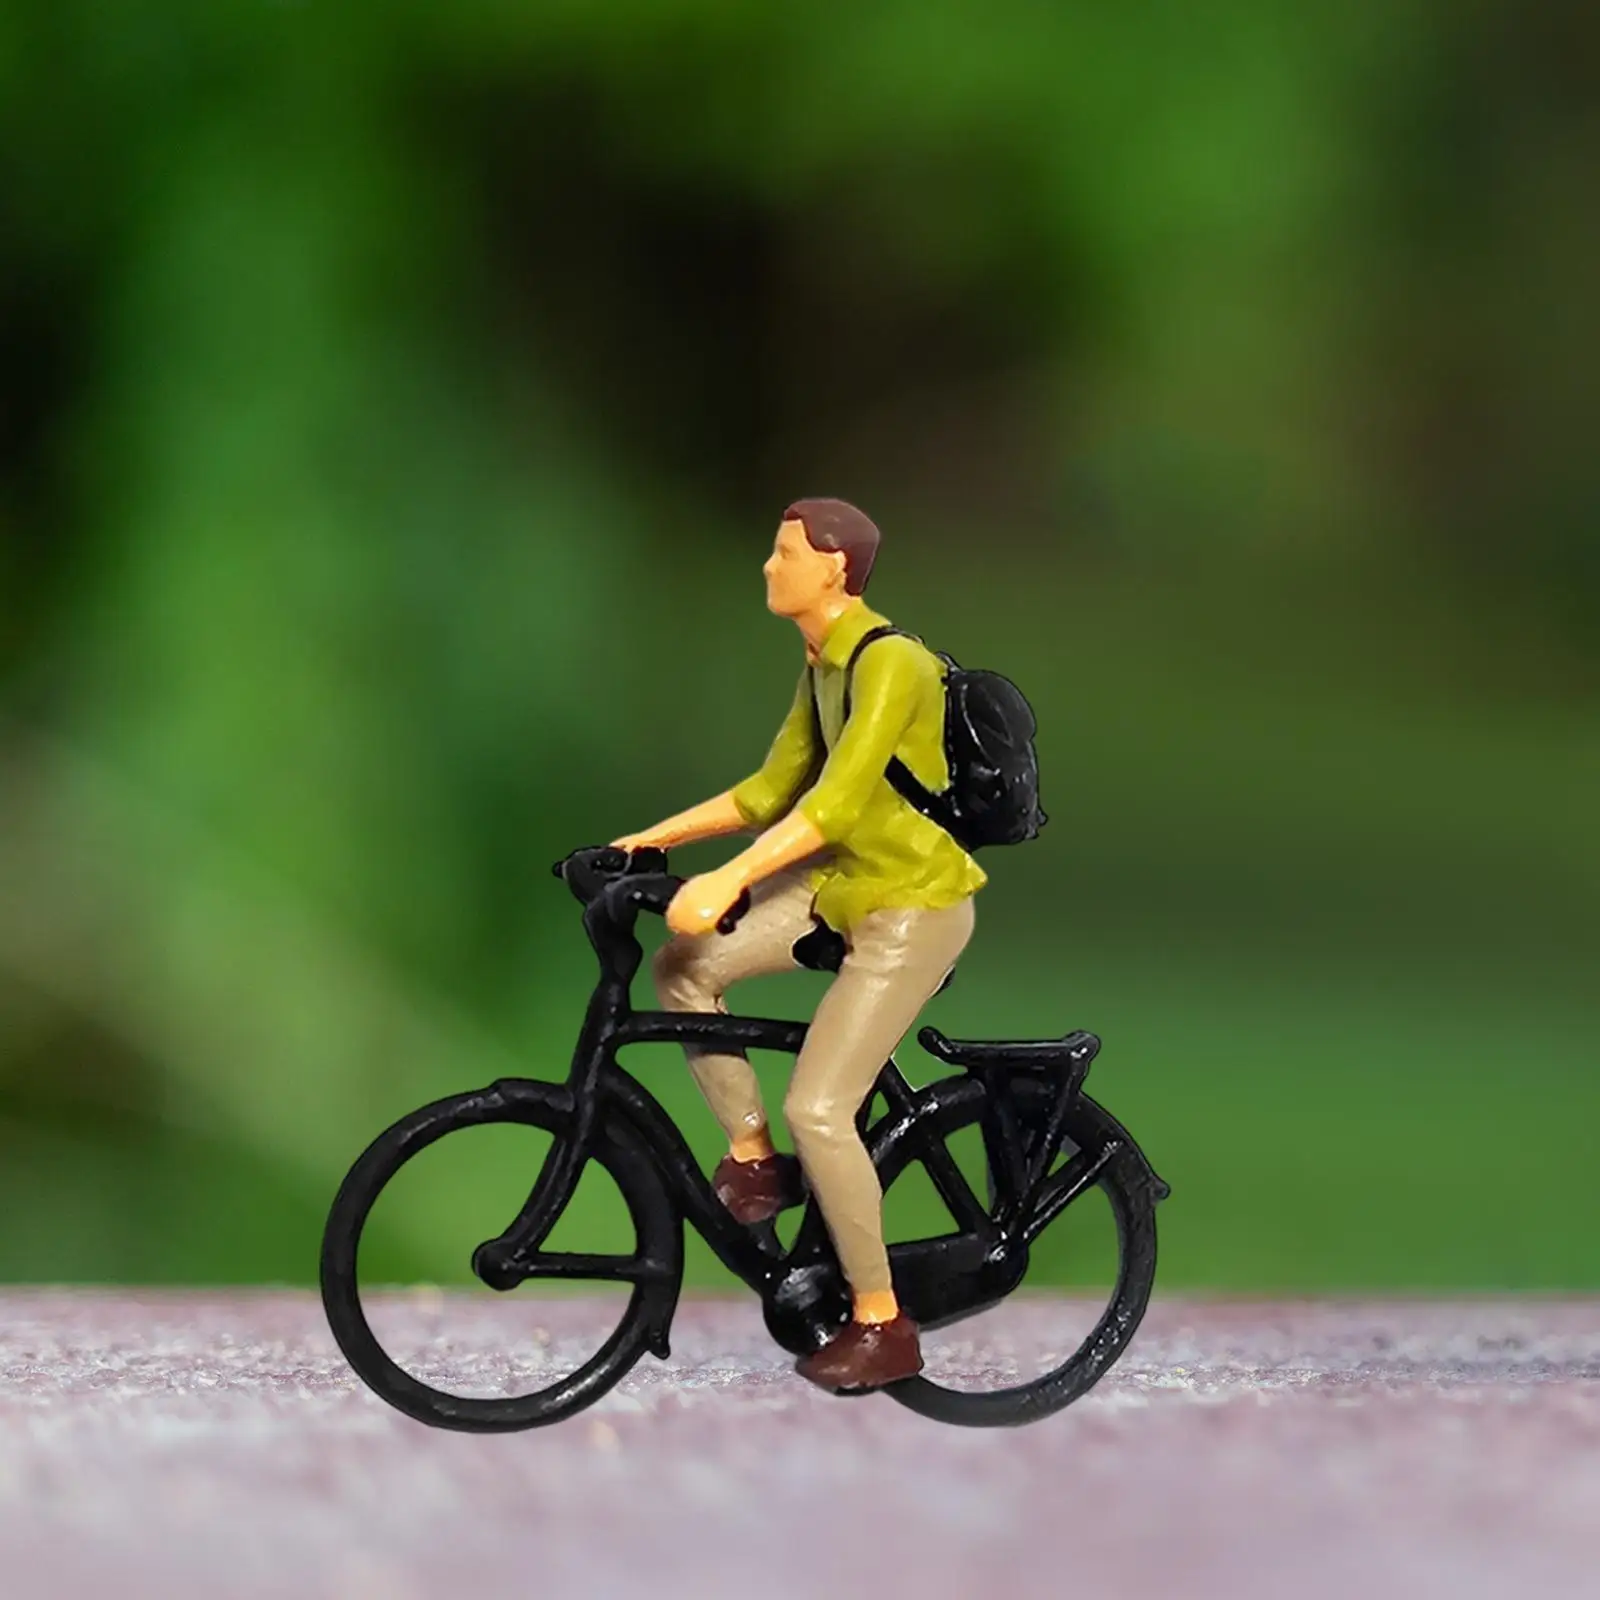 Resin 1/87 Scale Cyclist Figures Tiny People Ornament for Miniature Scene Layout